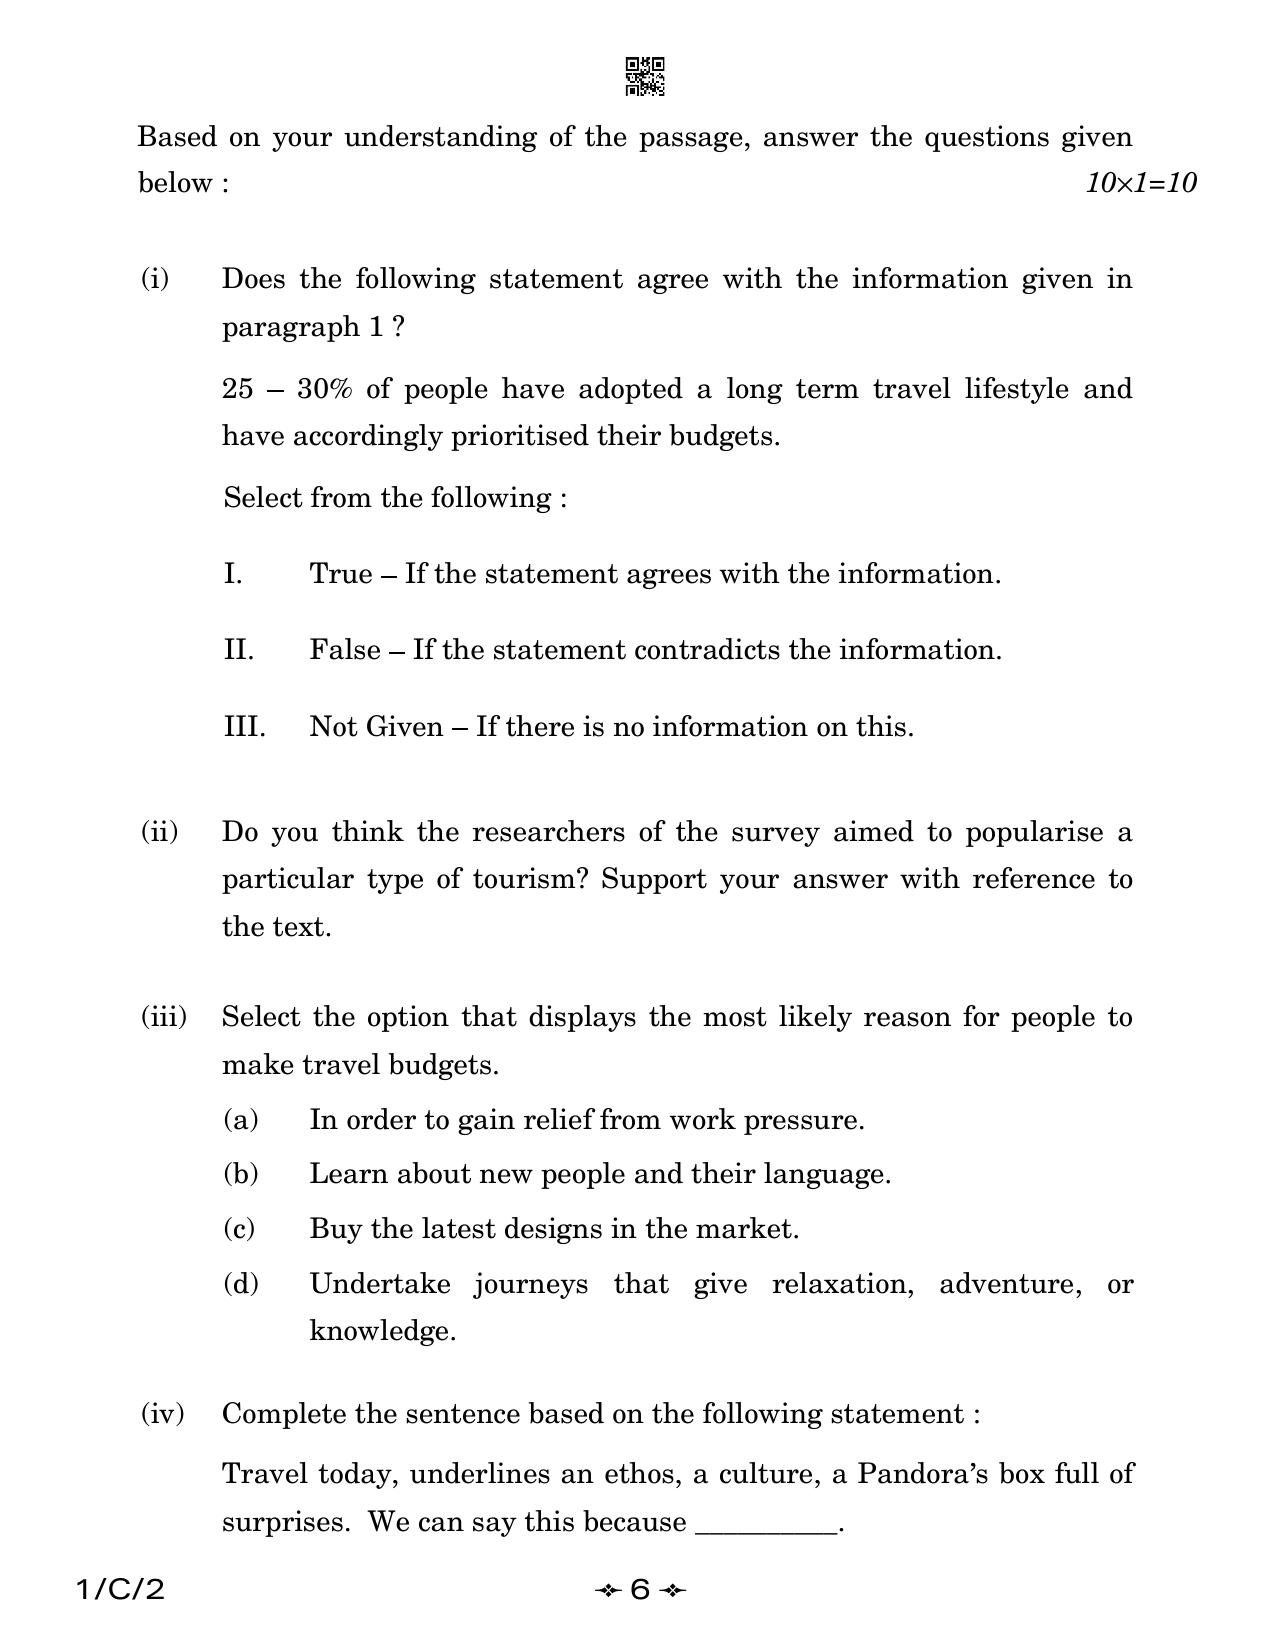 CBSE Class 12 1-2 English Core 2023 (Compartment) Question Paper - Page 6